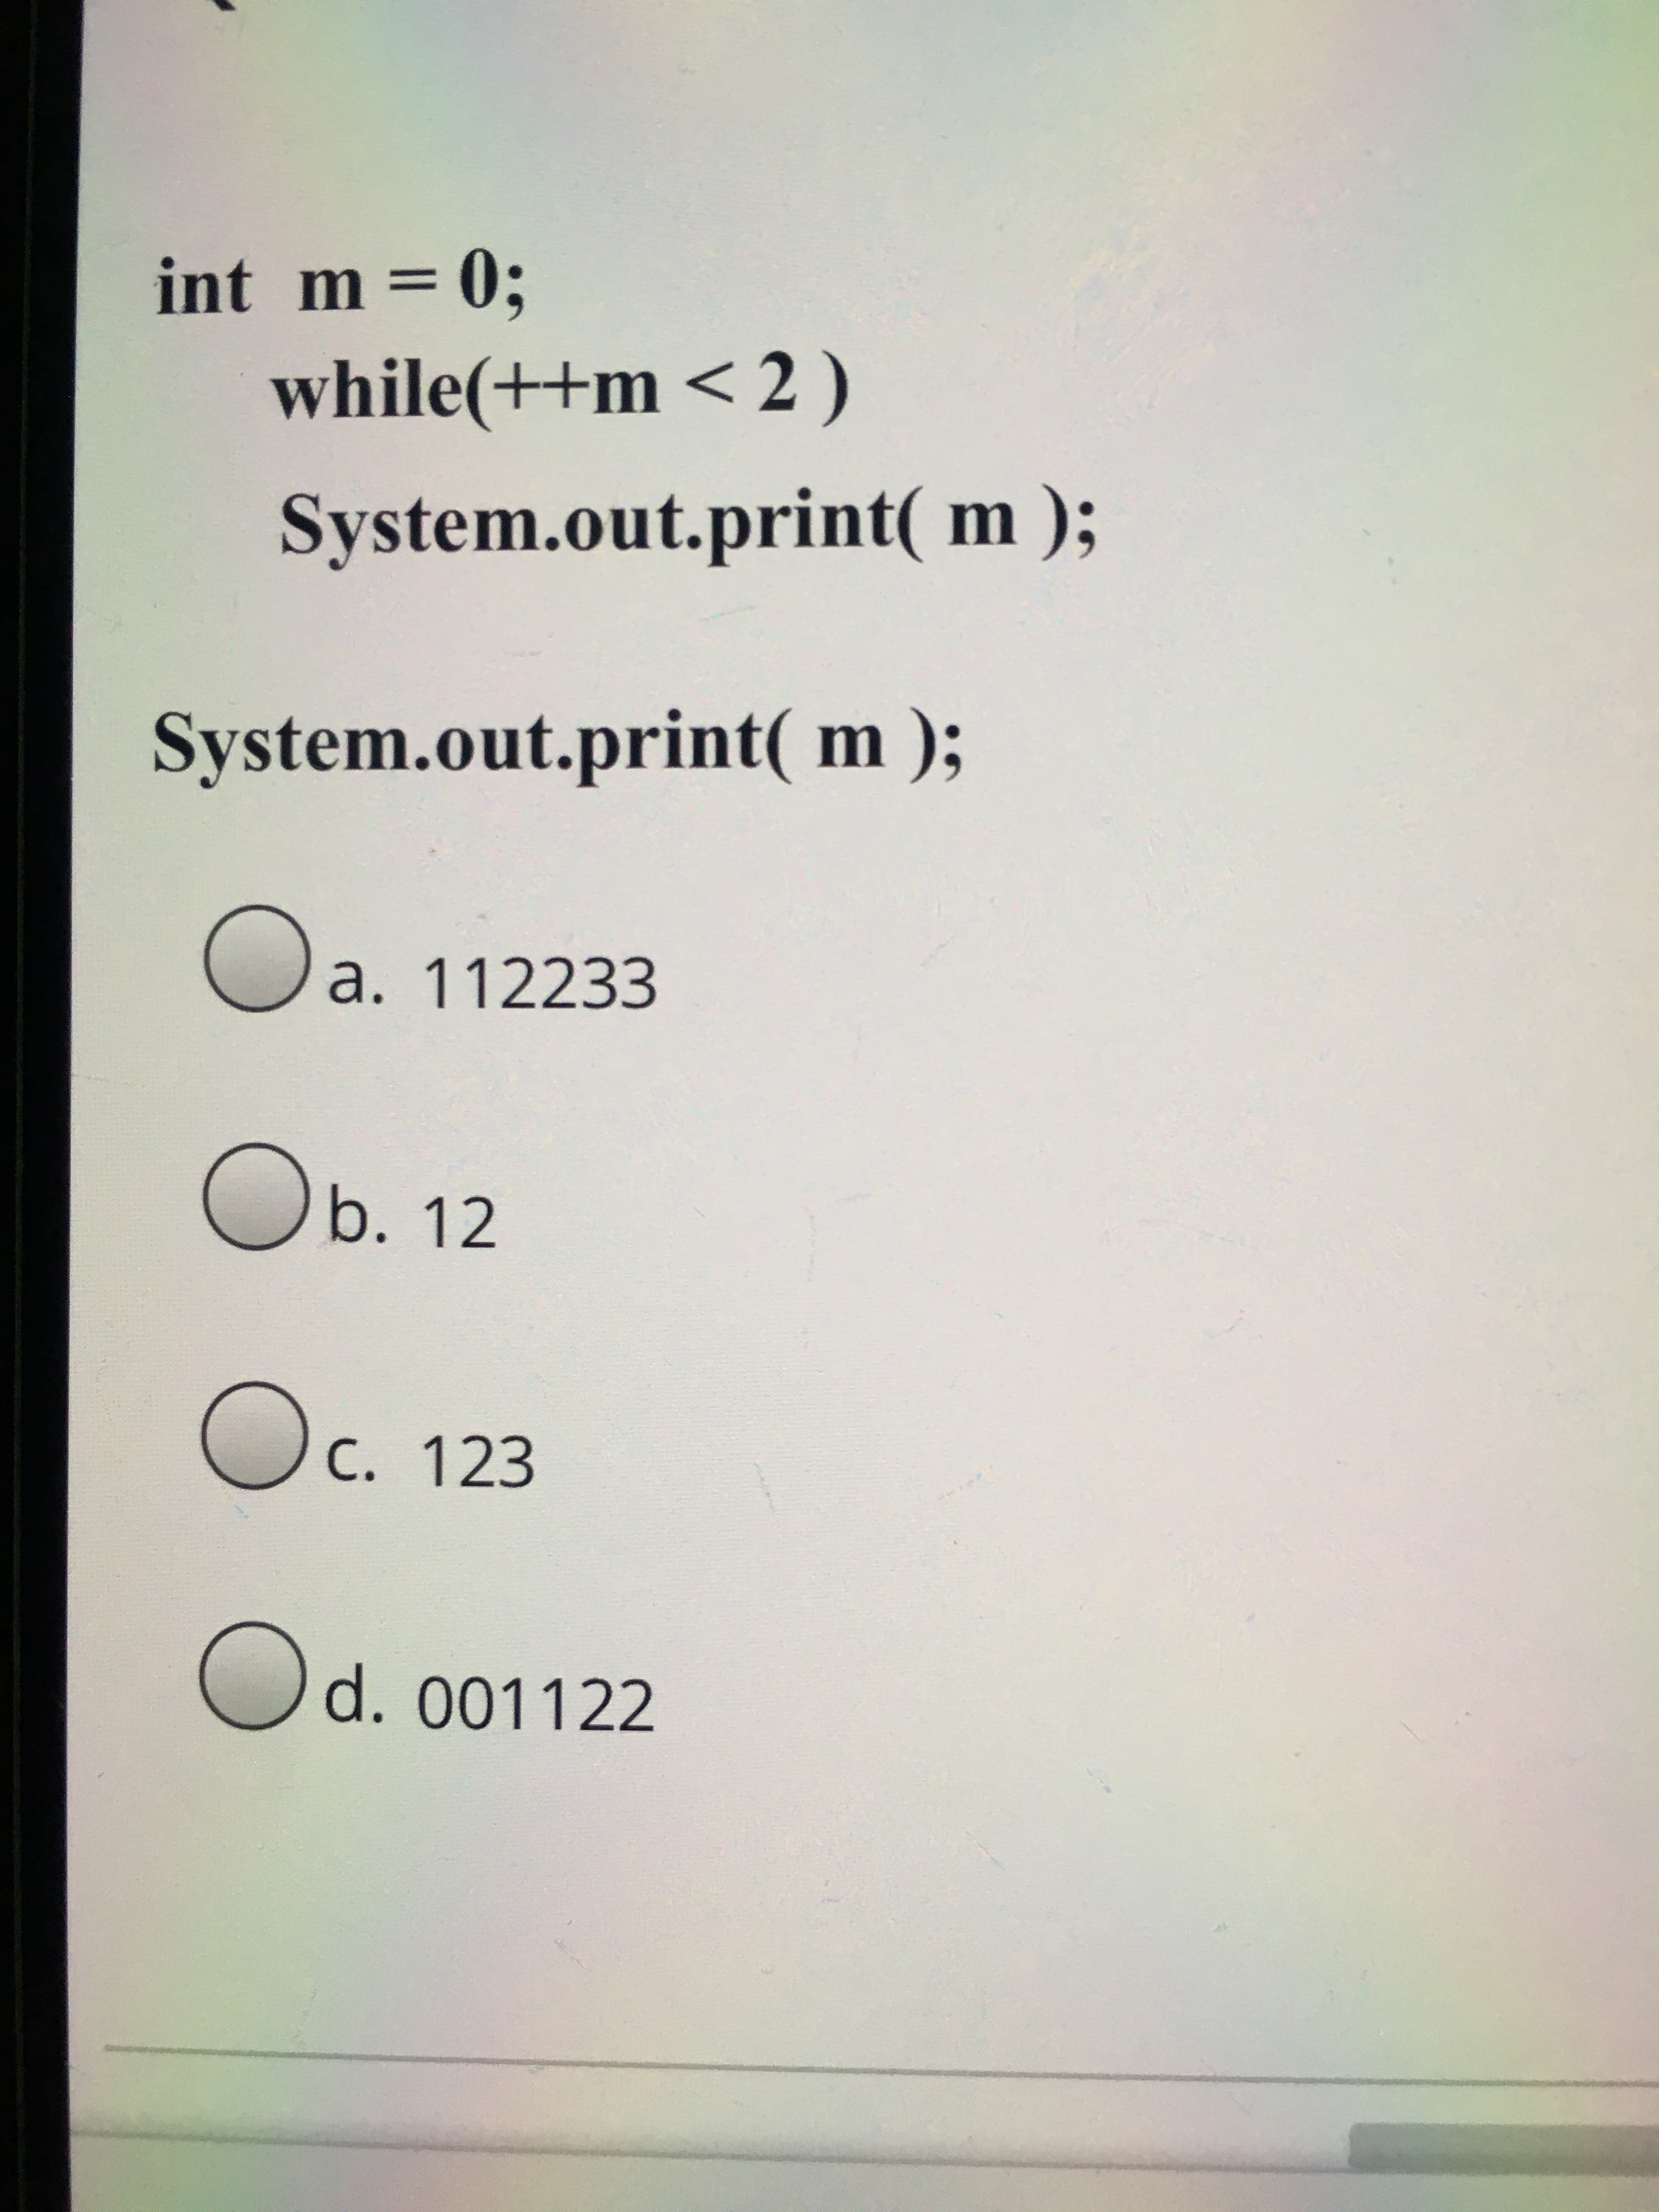 int m =0;
while(++m < 2 )
System.out.print( m );
System.out.print( m );
a. 112233
Ob. 12
C. 123
Od. 001122
